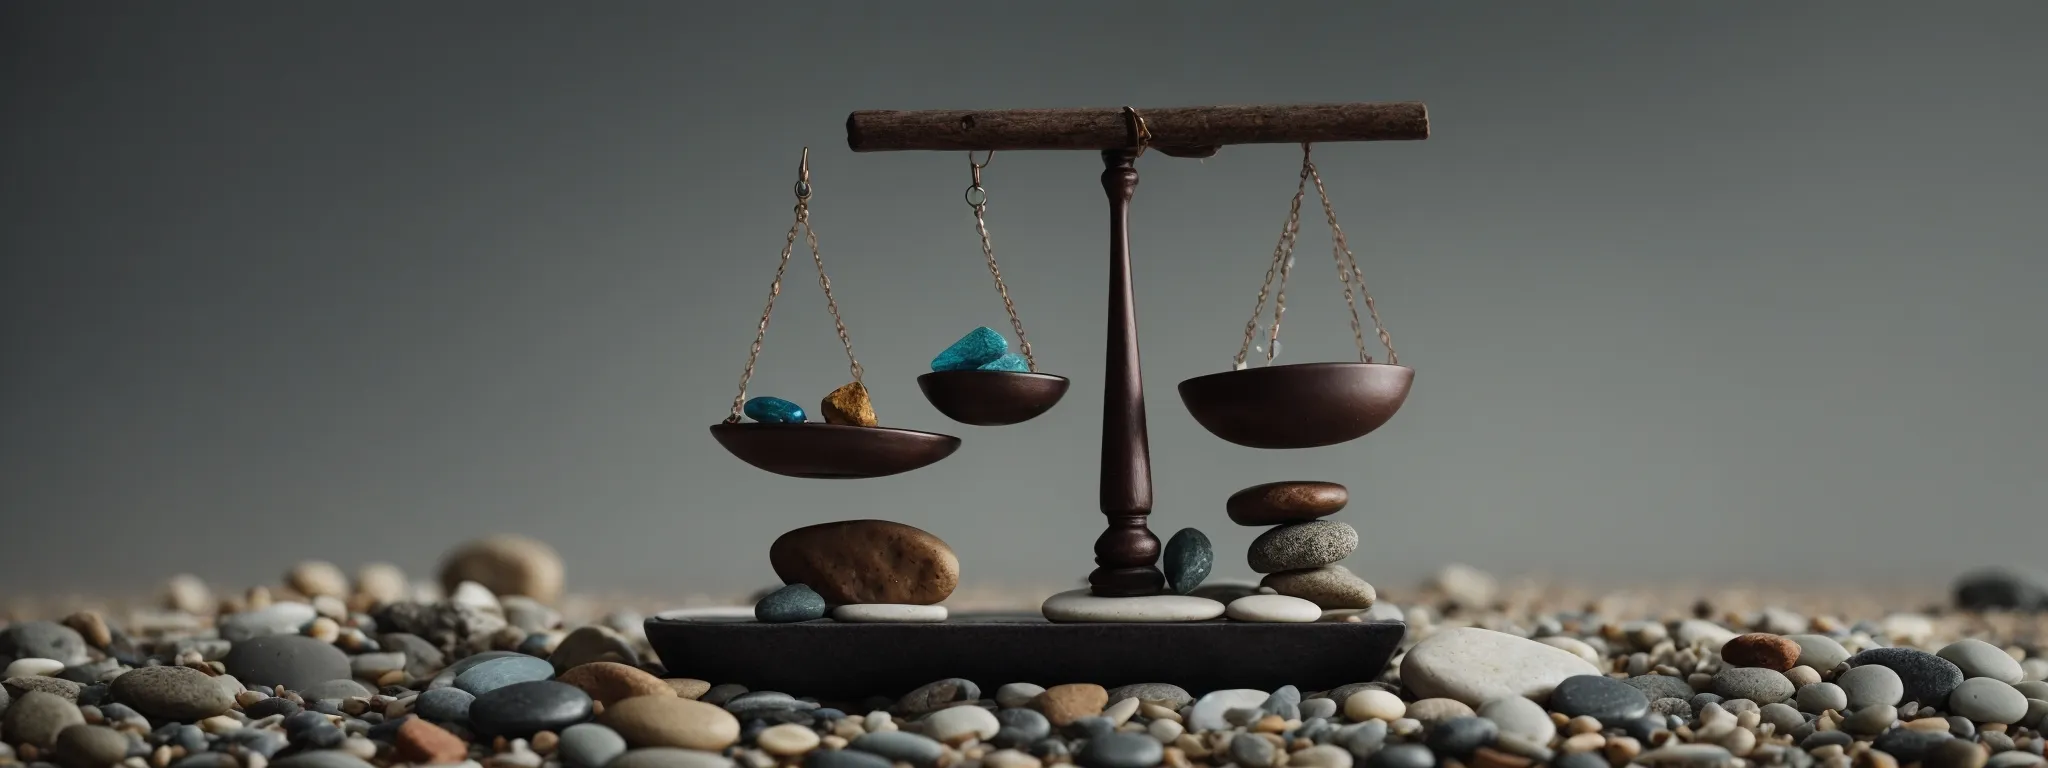 a balance scale unevenly tipped, contrasting a few precious stones on one side with a heap of pebbles on the other.